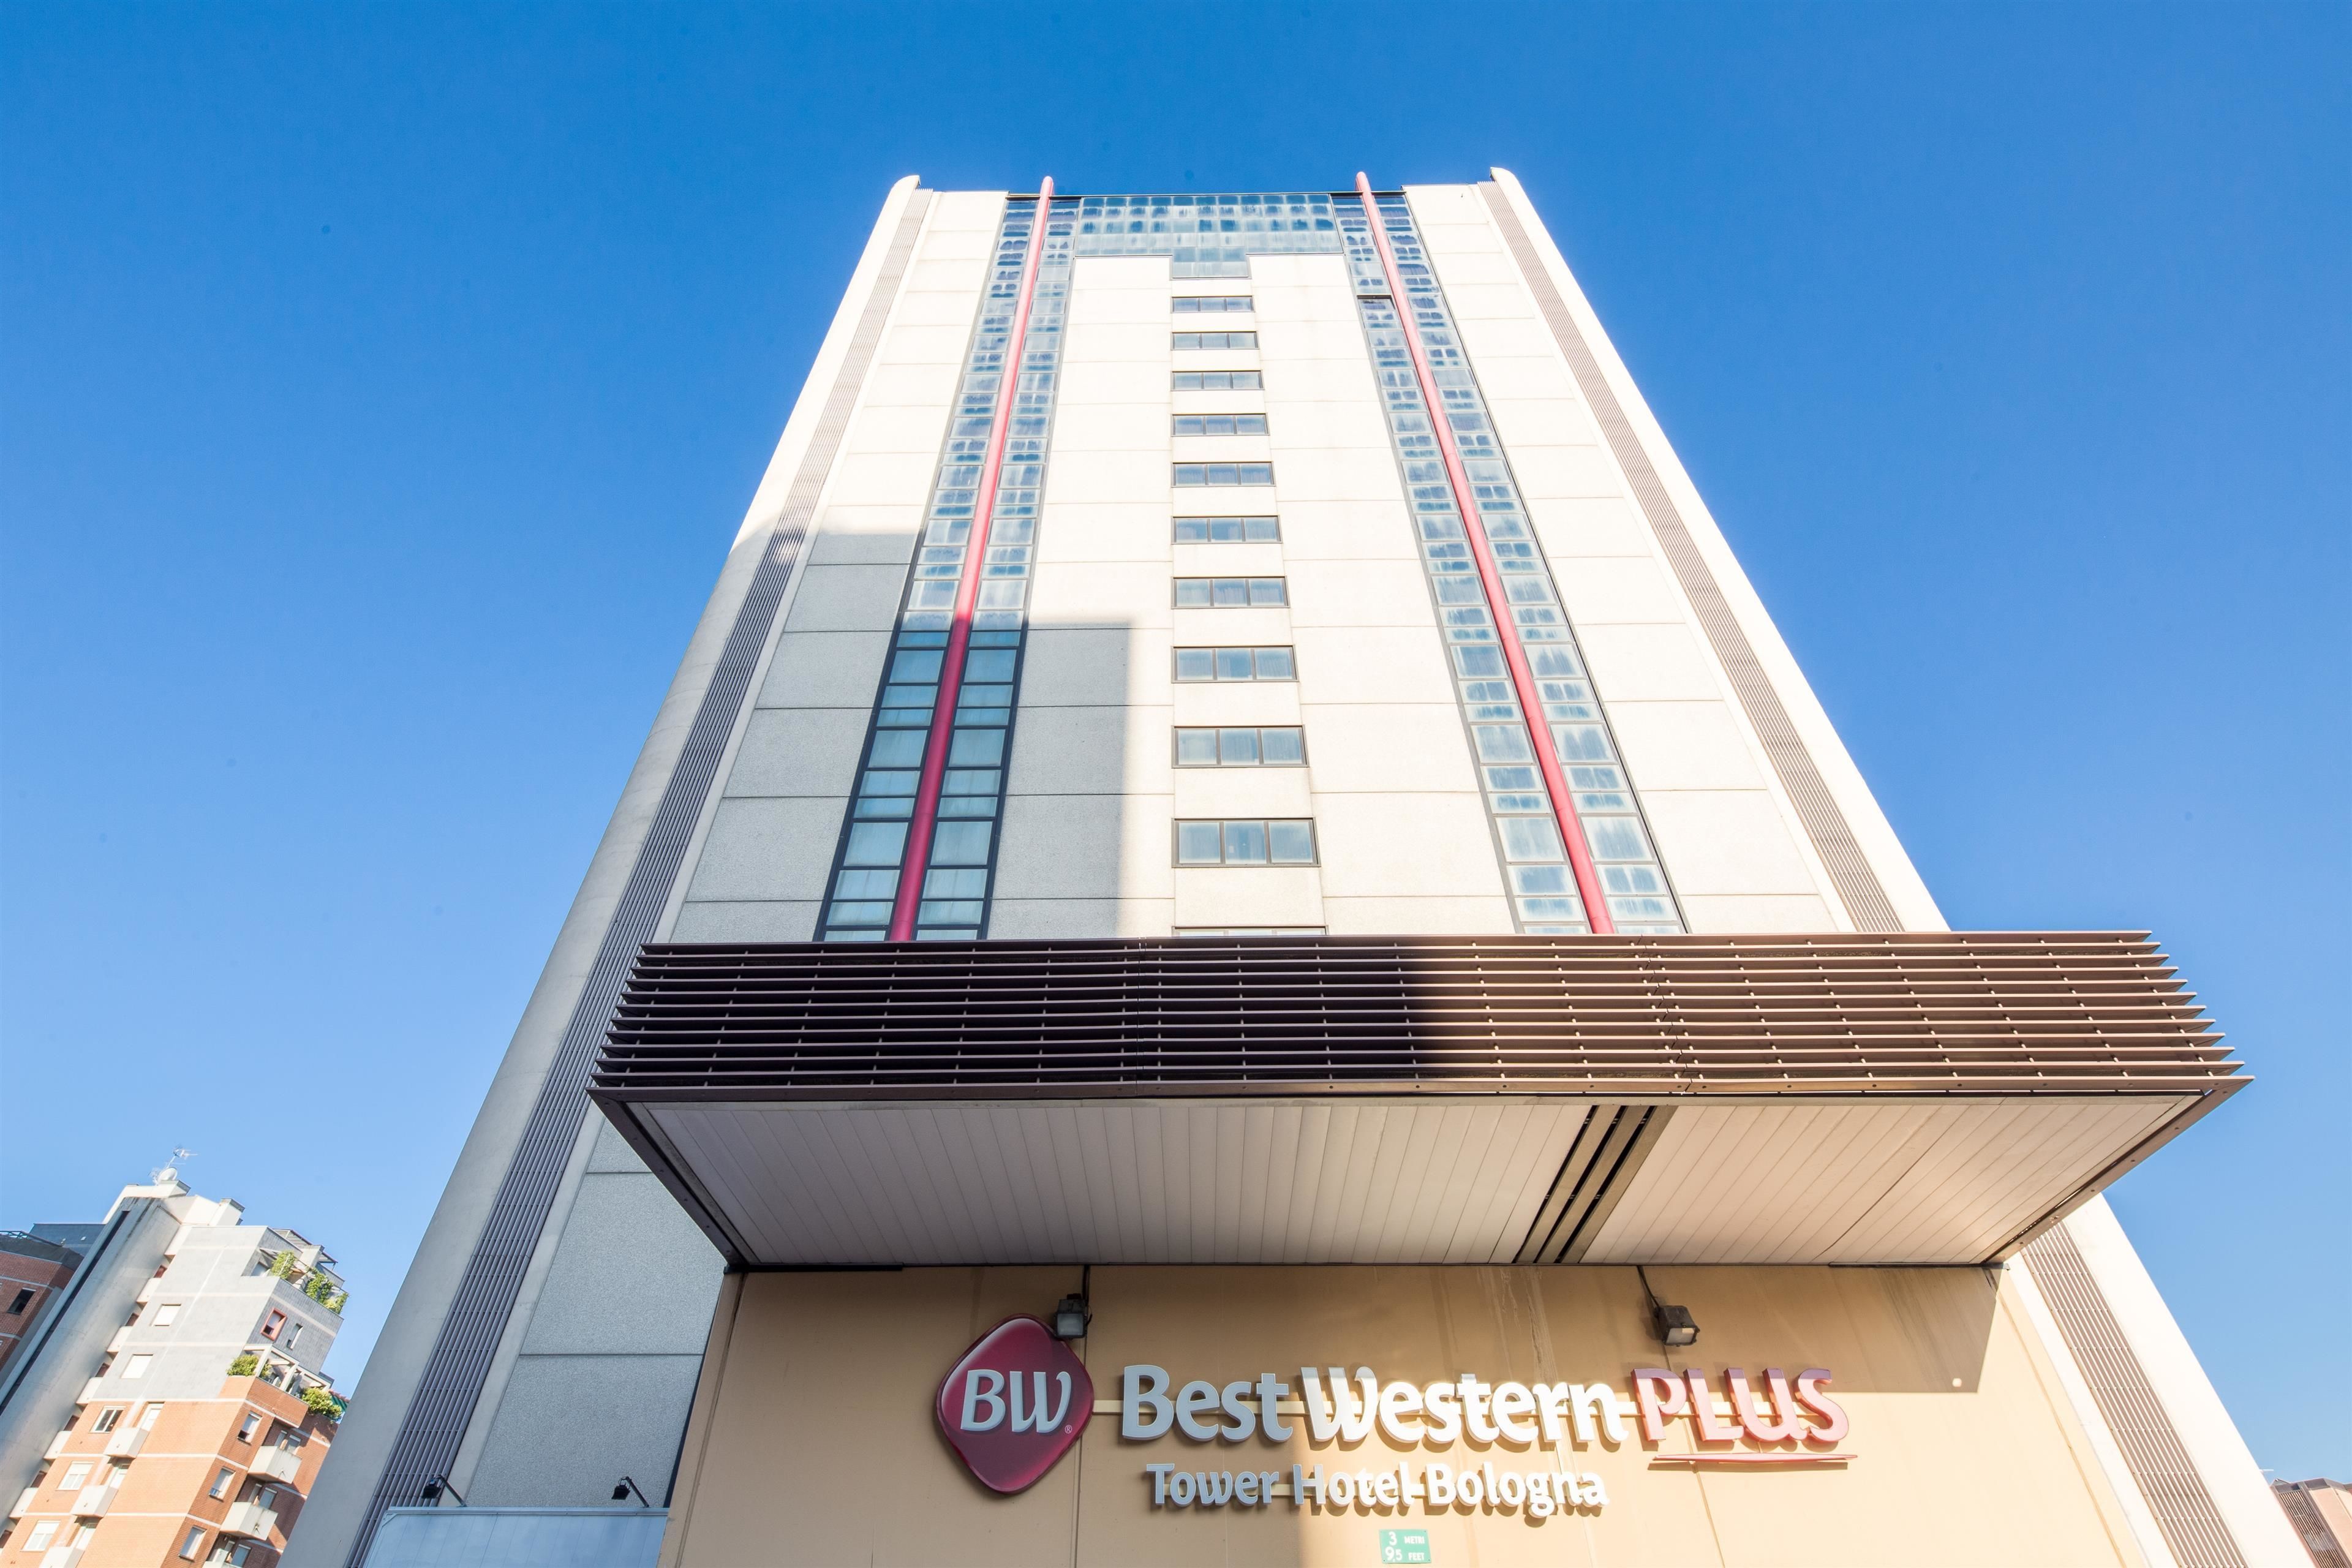 Best Western Plus Tower Hotel Bologna image 1